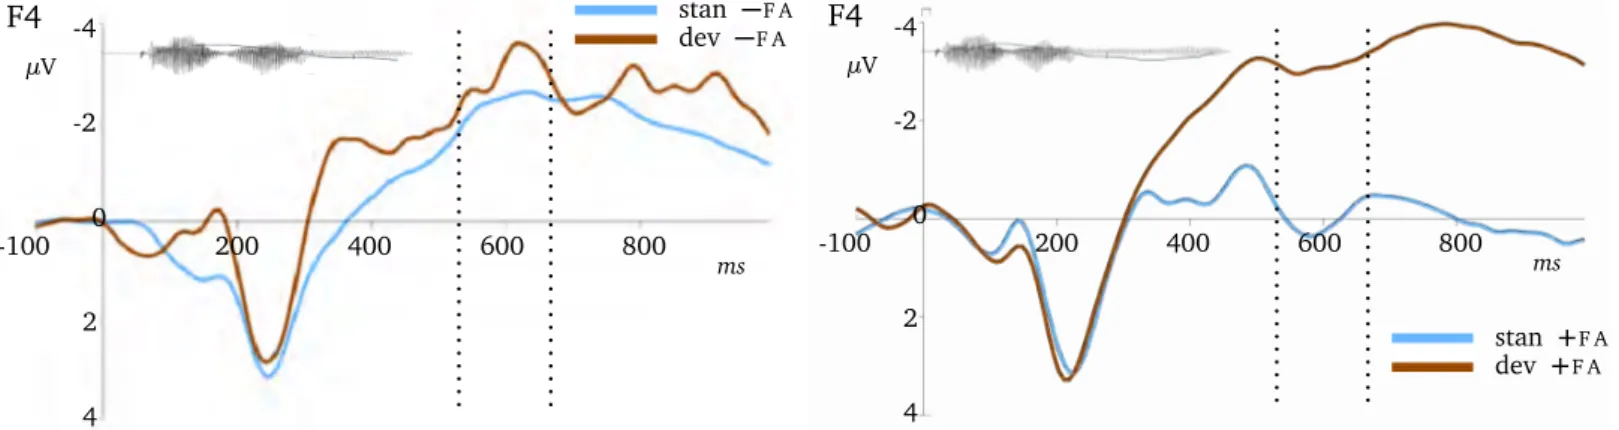 Figure 6.3: E R P components for − F A (left) and + F A (right) stimuli, recorded at the F4 (right frontal) electrode, with the oscillograms of [paKadi] plotted in the background to indicate the relation between the offset of the ± F A manipulation and the